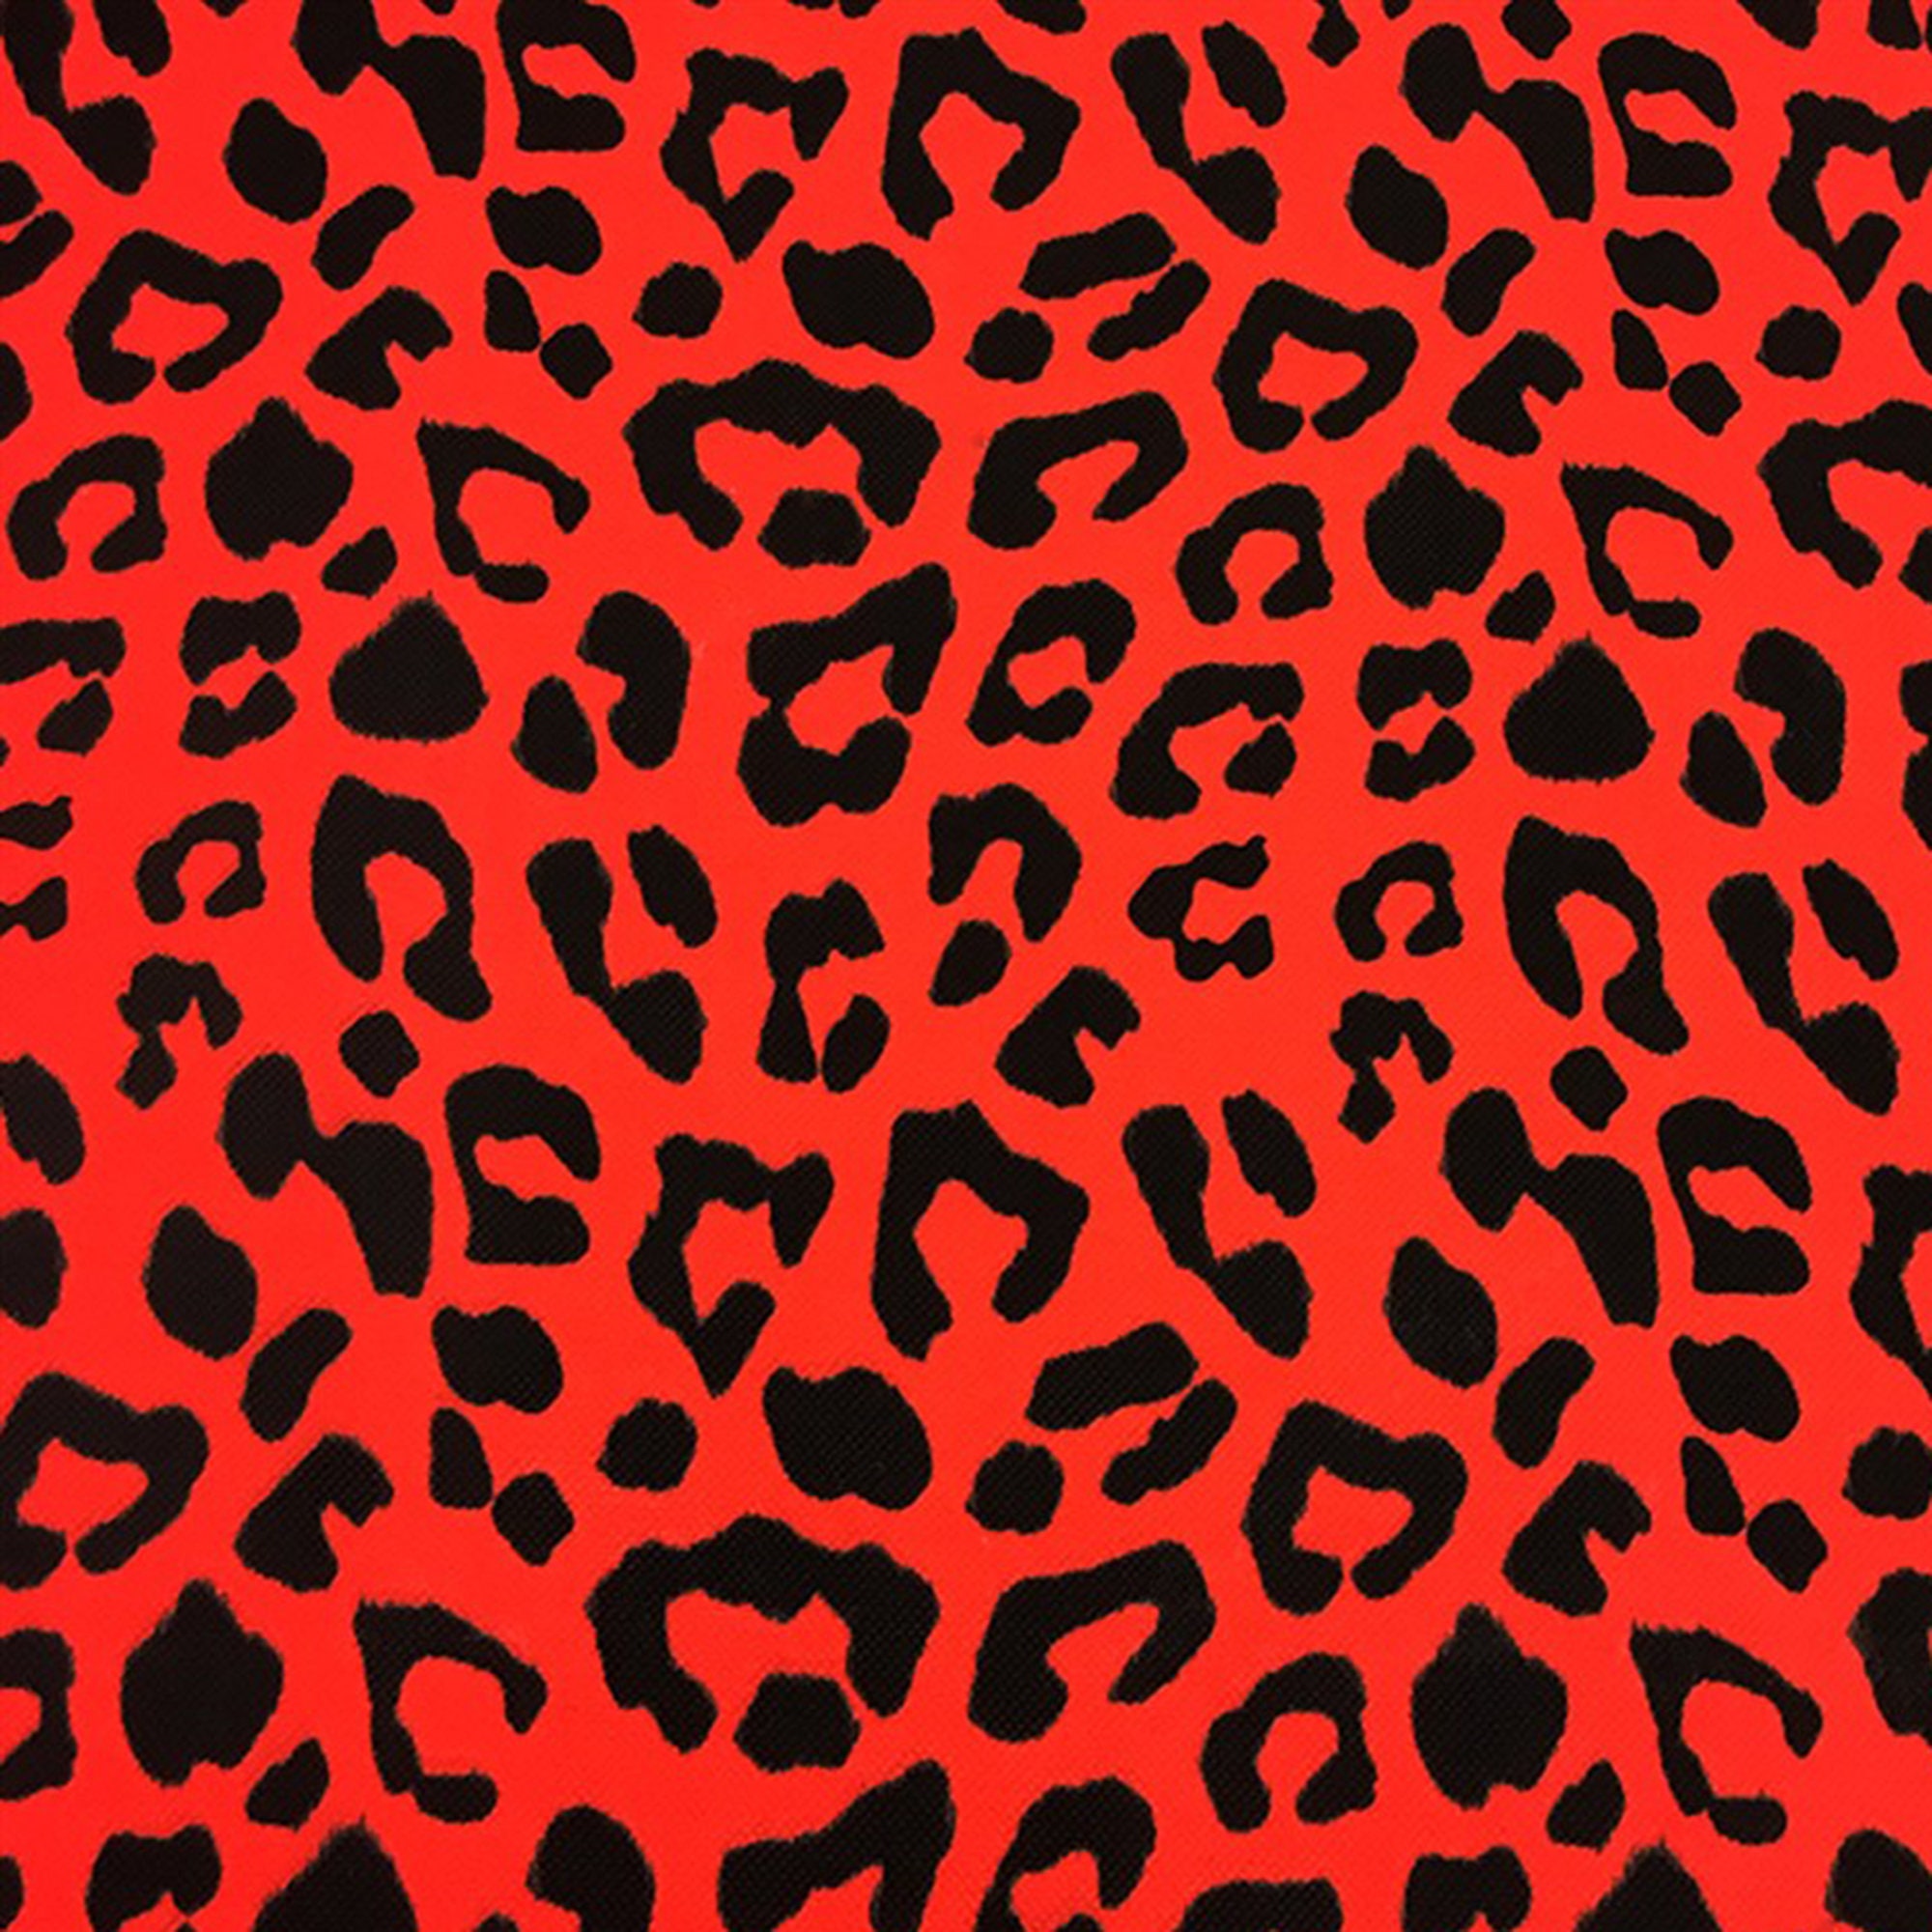 Red Leopard Fabric by the Yard, Black & Red Cheetah Animal Print Fabric,  Decorative Canvas Home Decor Upholstery Fabric for Chair Sofa Bench 